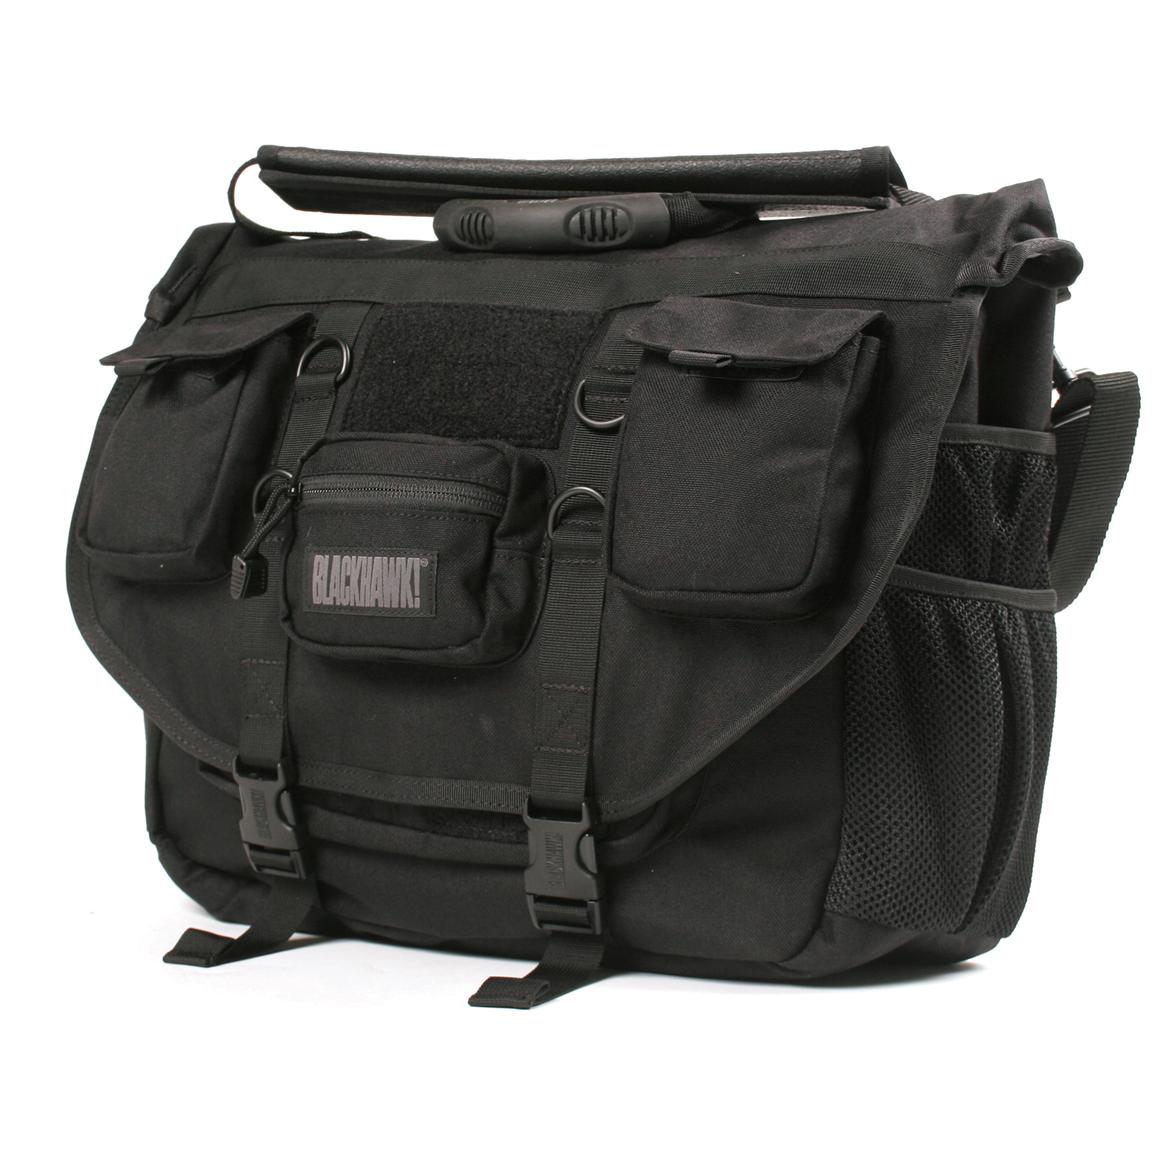 Blackhawk!® Advanced Tactical Briefcase - 187937, Military Style ...